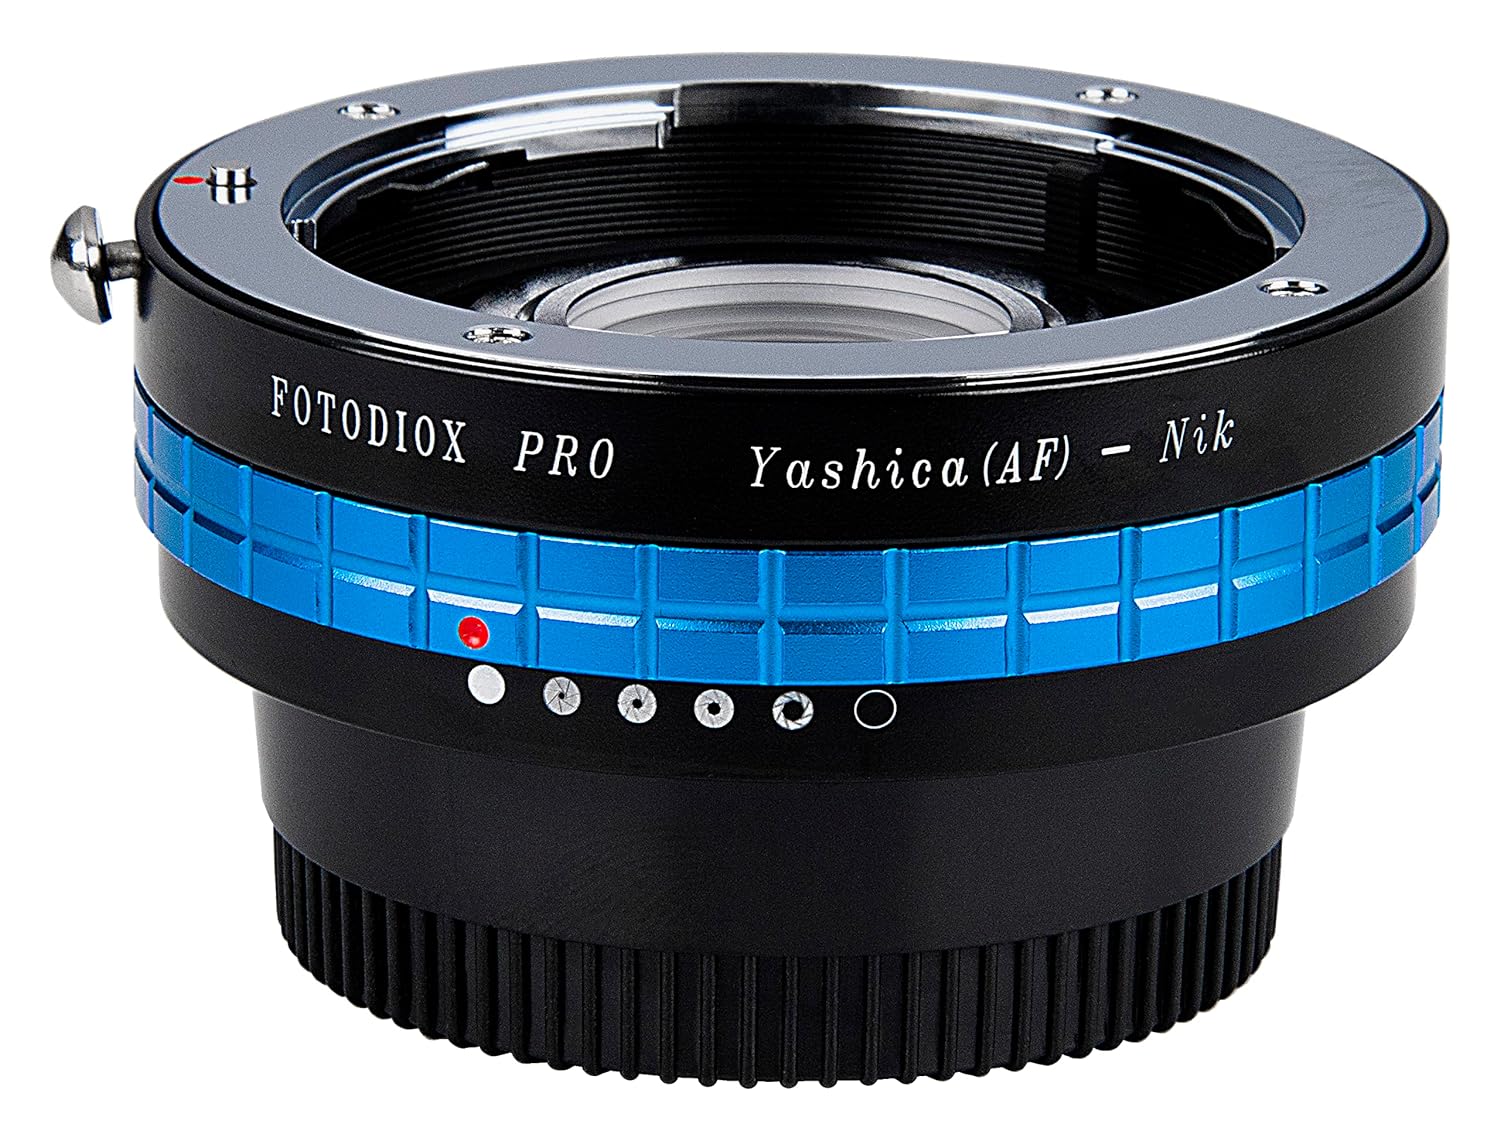 Fotodiox Pro Lens Mount Adapter - Yashica 230 AF SLR Lens to Nikon F Mount SLR Camera Body with Built-in Aperture Control Dial